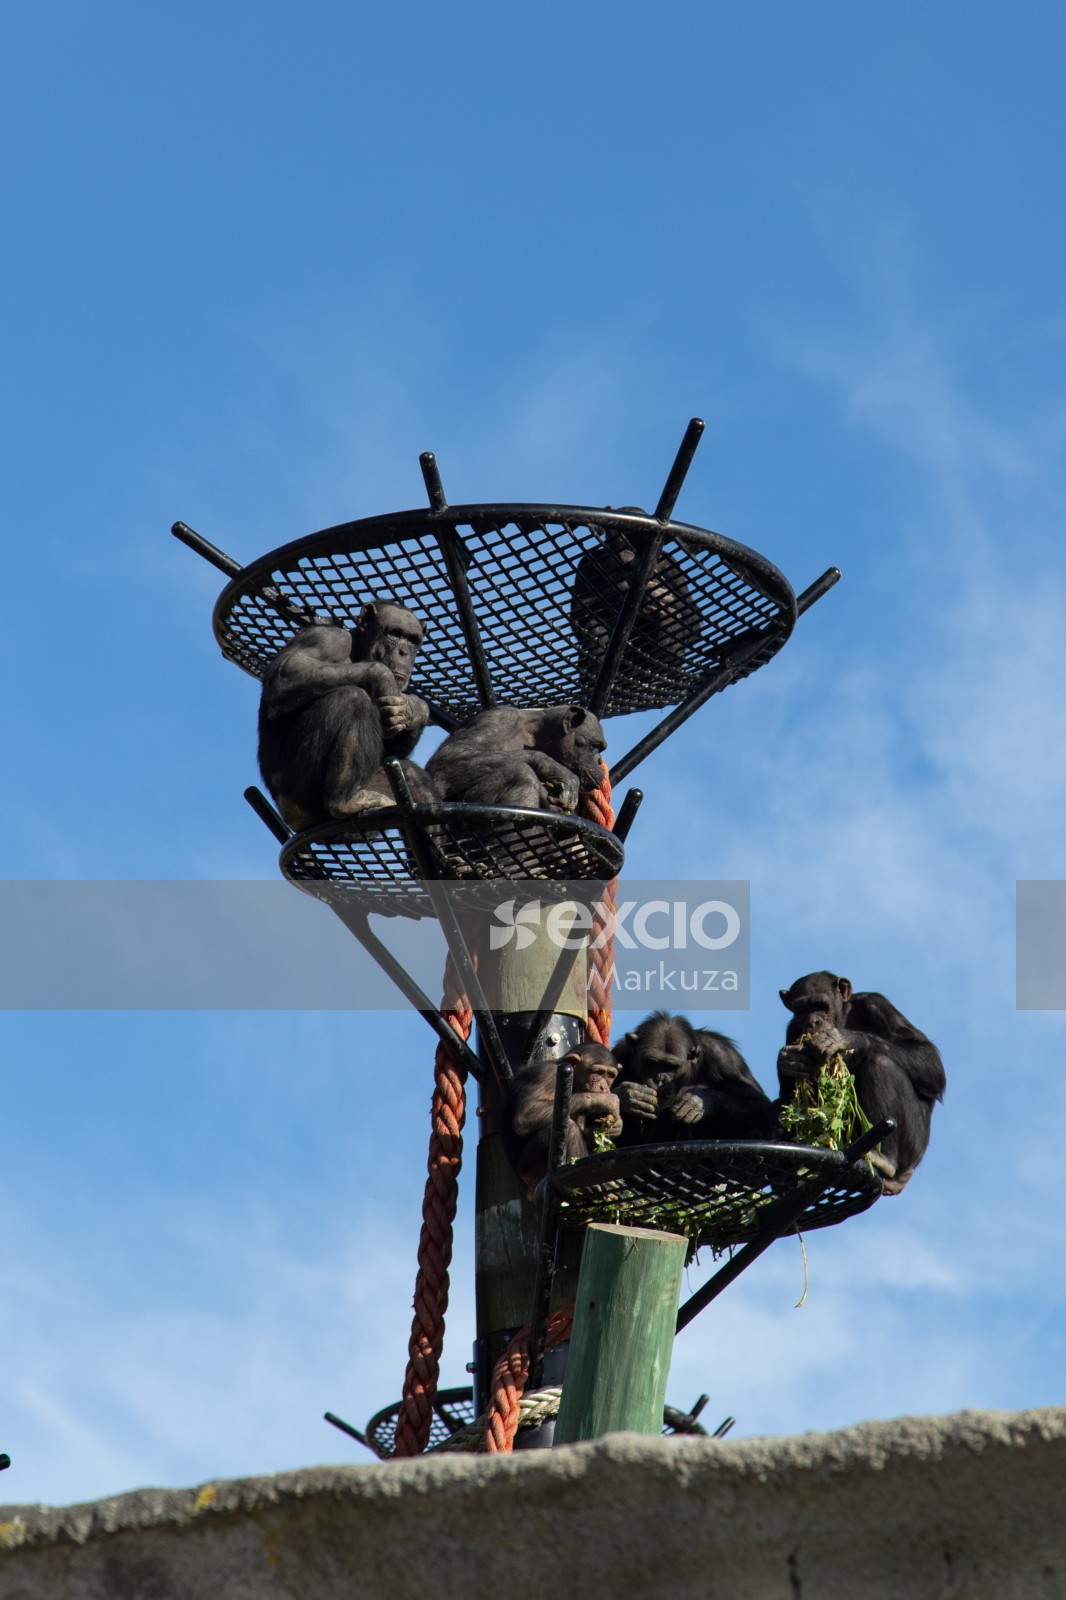 A happy bunch of Chimpanzees